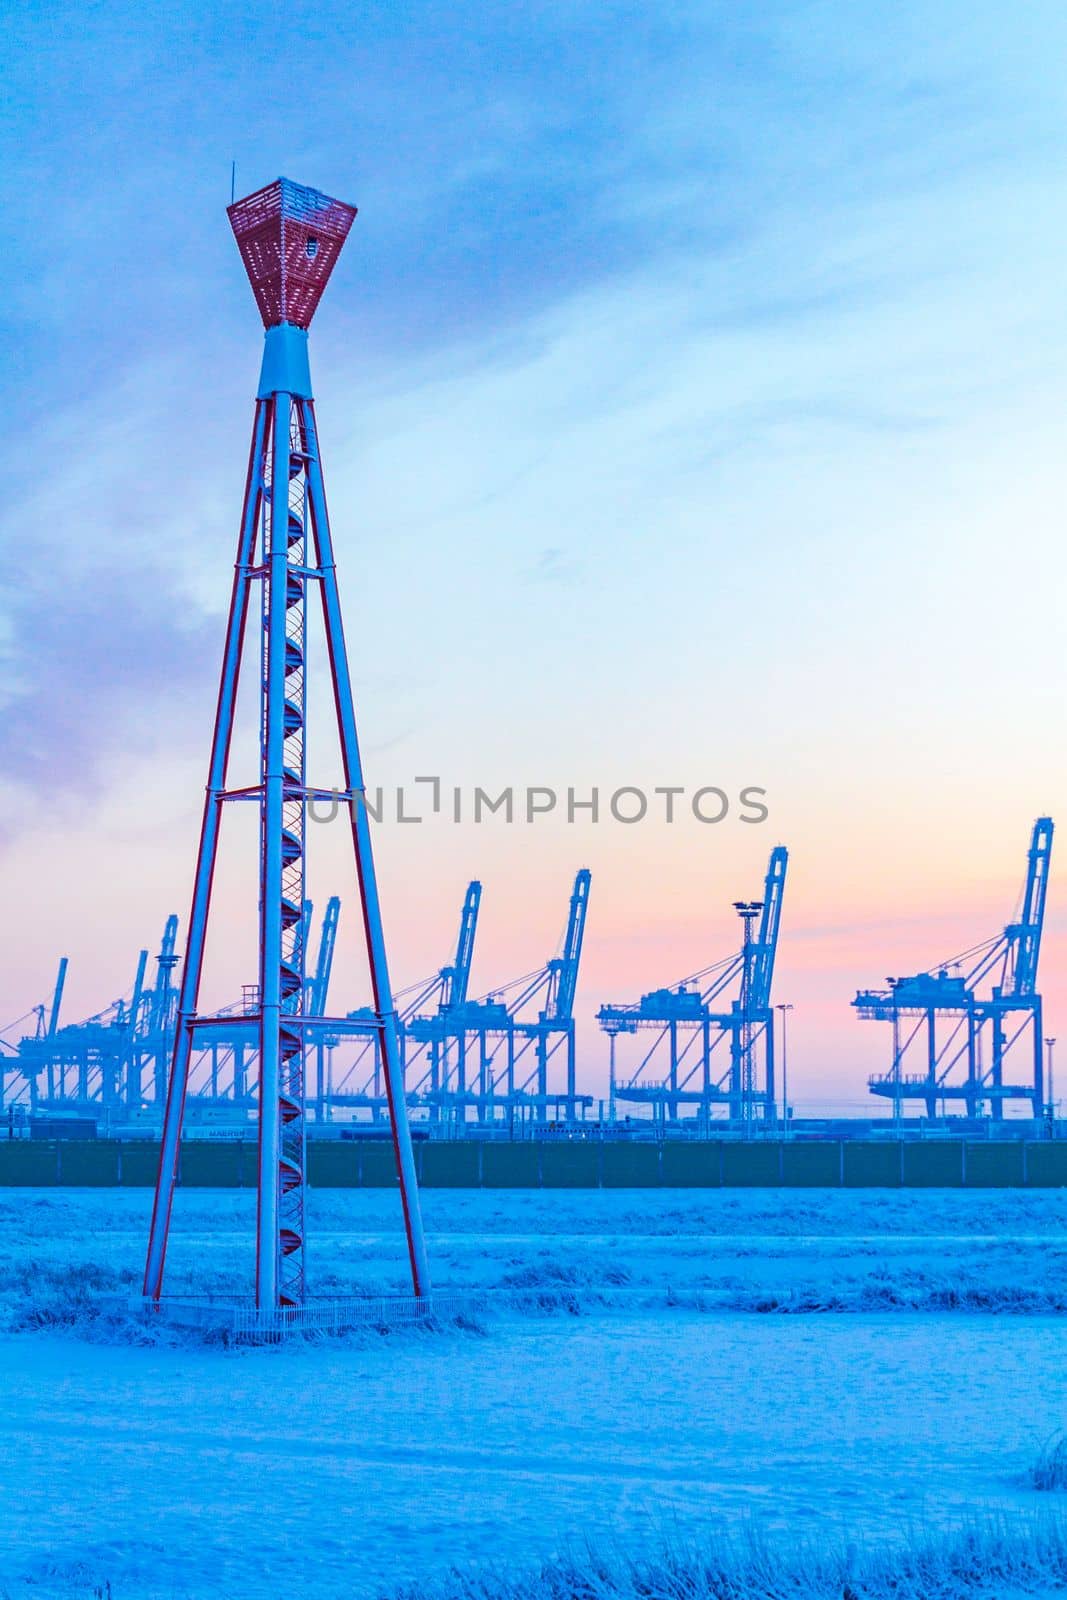 Shipyard cranes shipyard crane and container port with cold and snow in winter at sunset in Weddewarden Bremerhaven Germany.